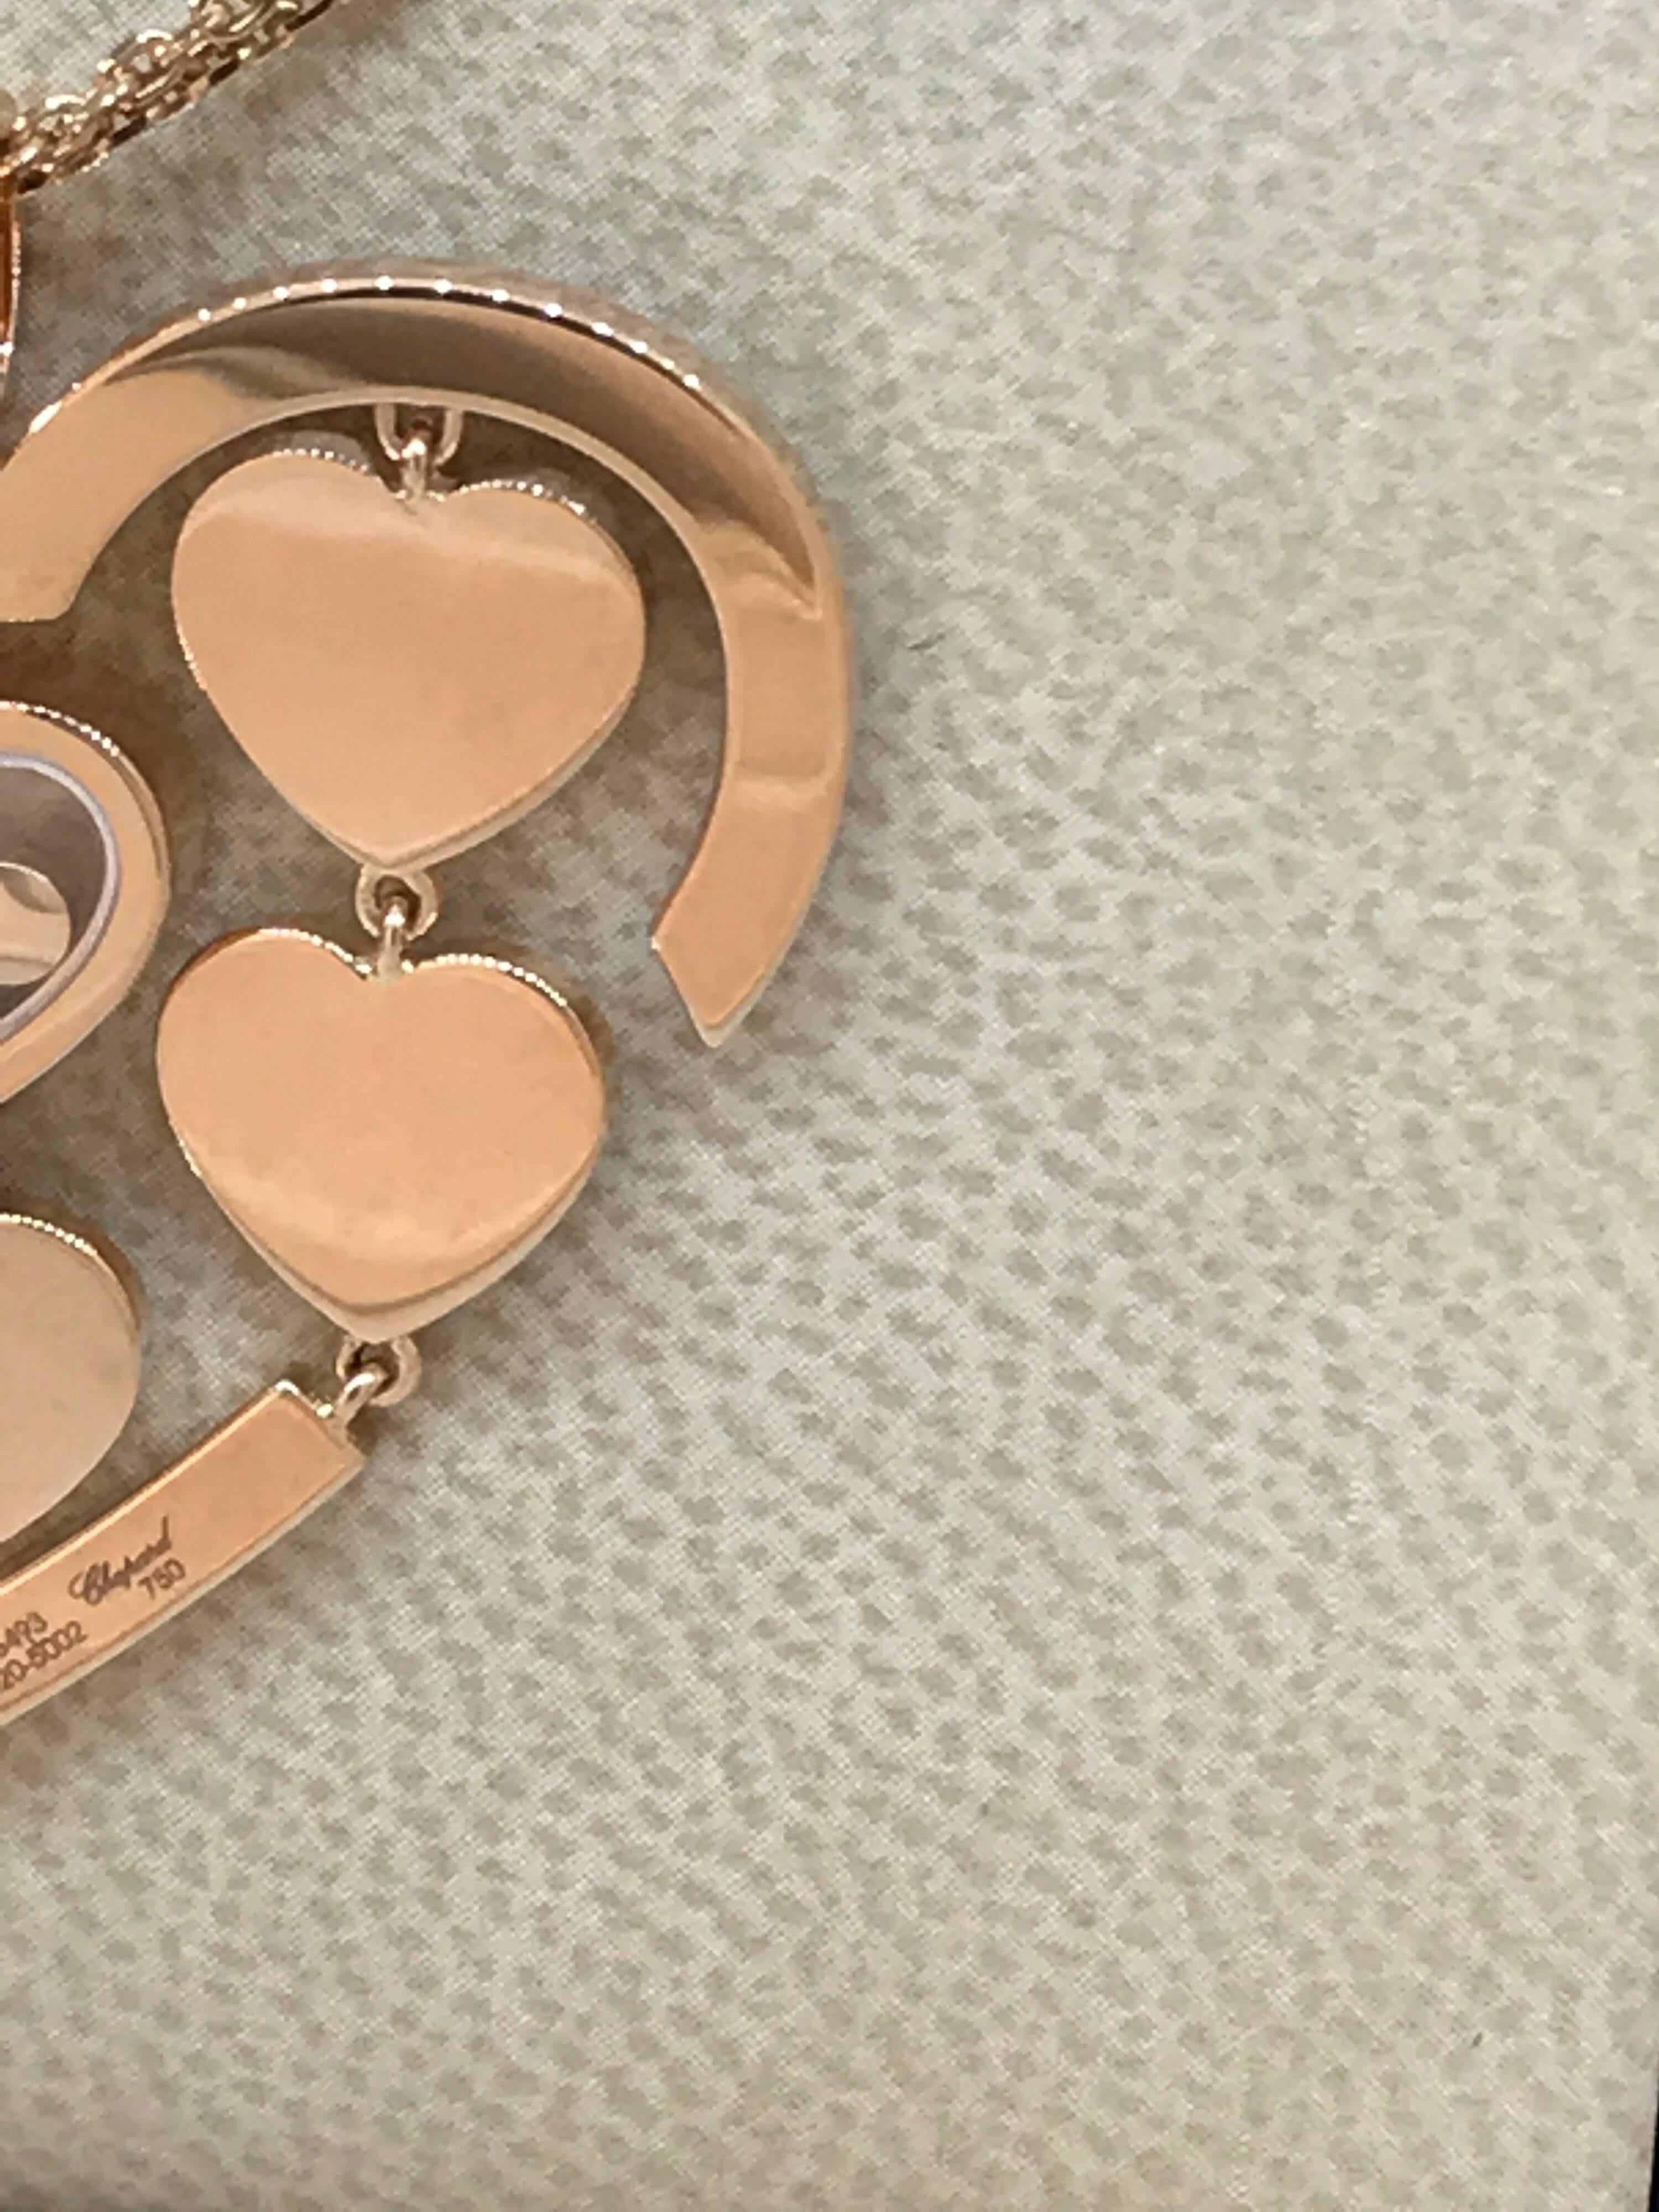 Chopard Amore Hearts 18 Karat Rose Gold and Diamonds Pendant or Necklace In New Condition For Sale In New York, NY